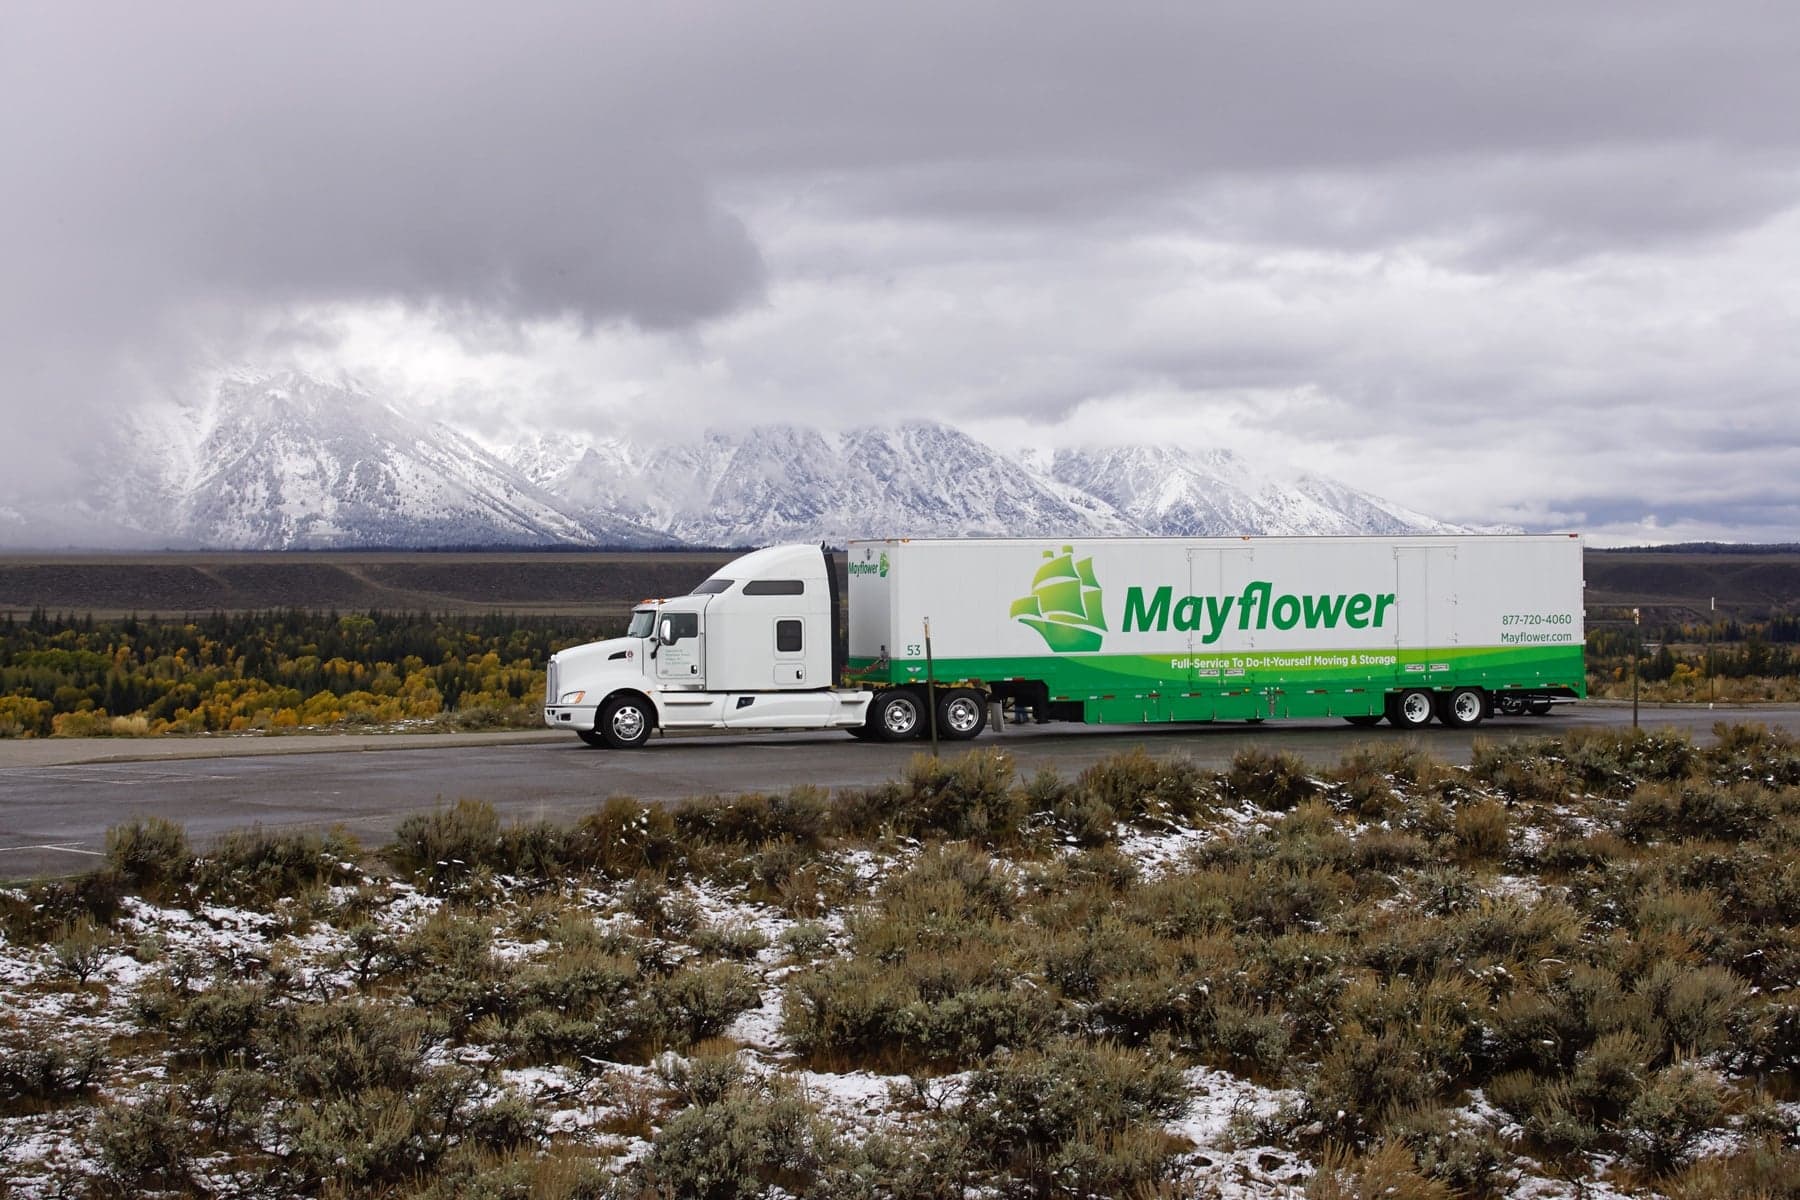 Mayflower moving truck on a highway with snowy mountains in the background